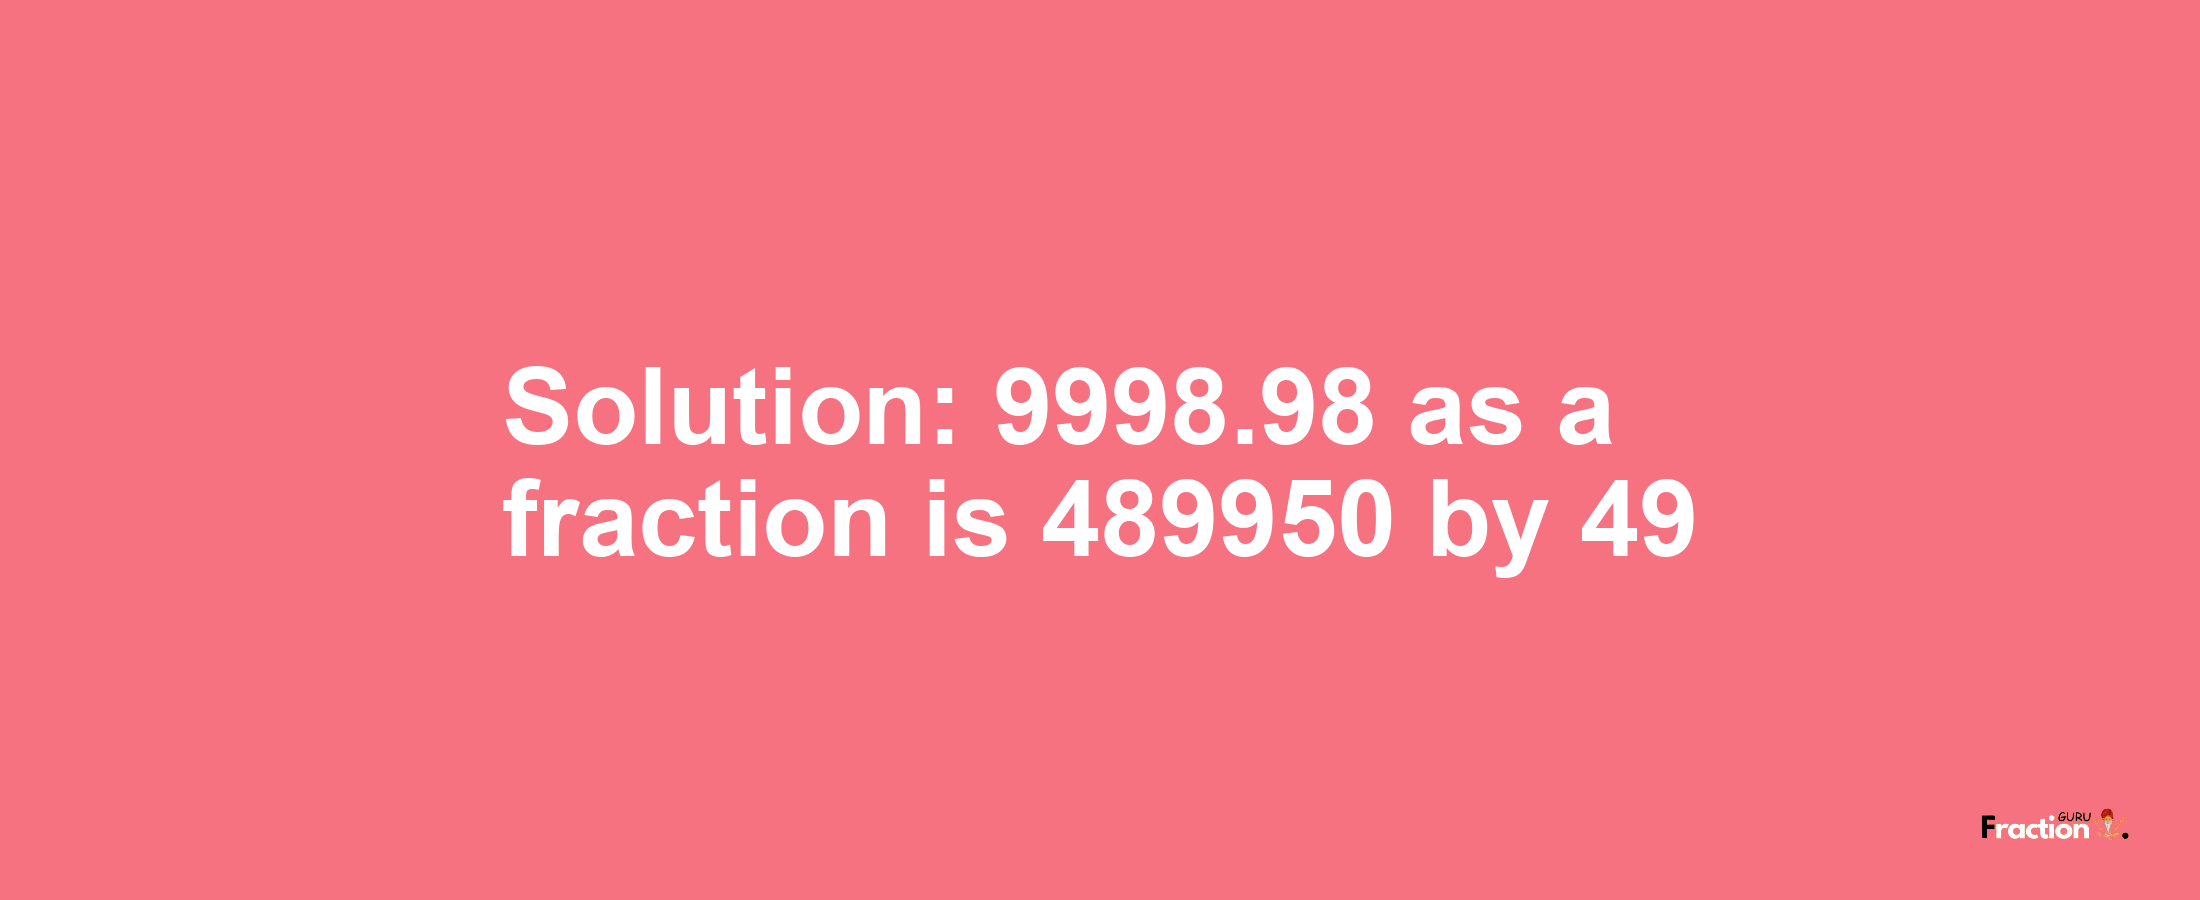 Solution:9998.98 as a fraction is 489950/49